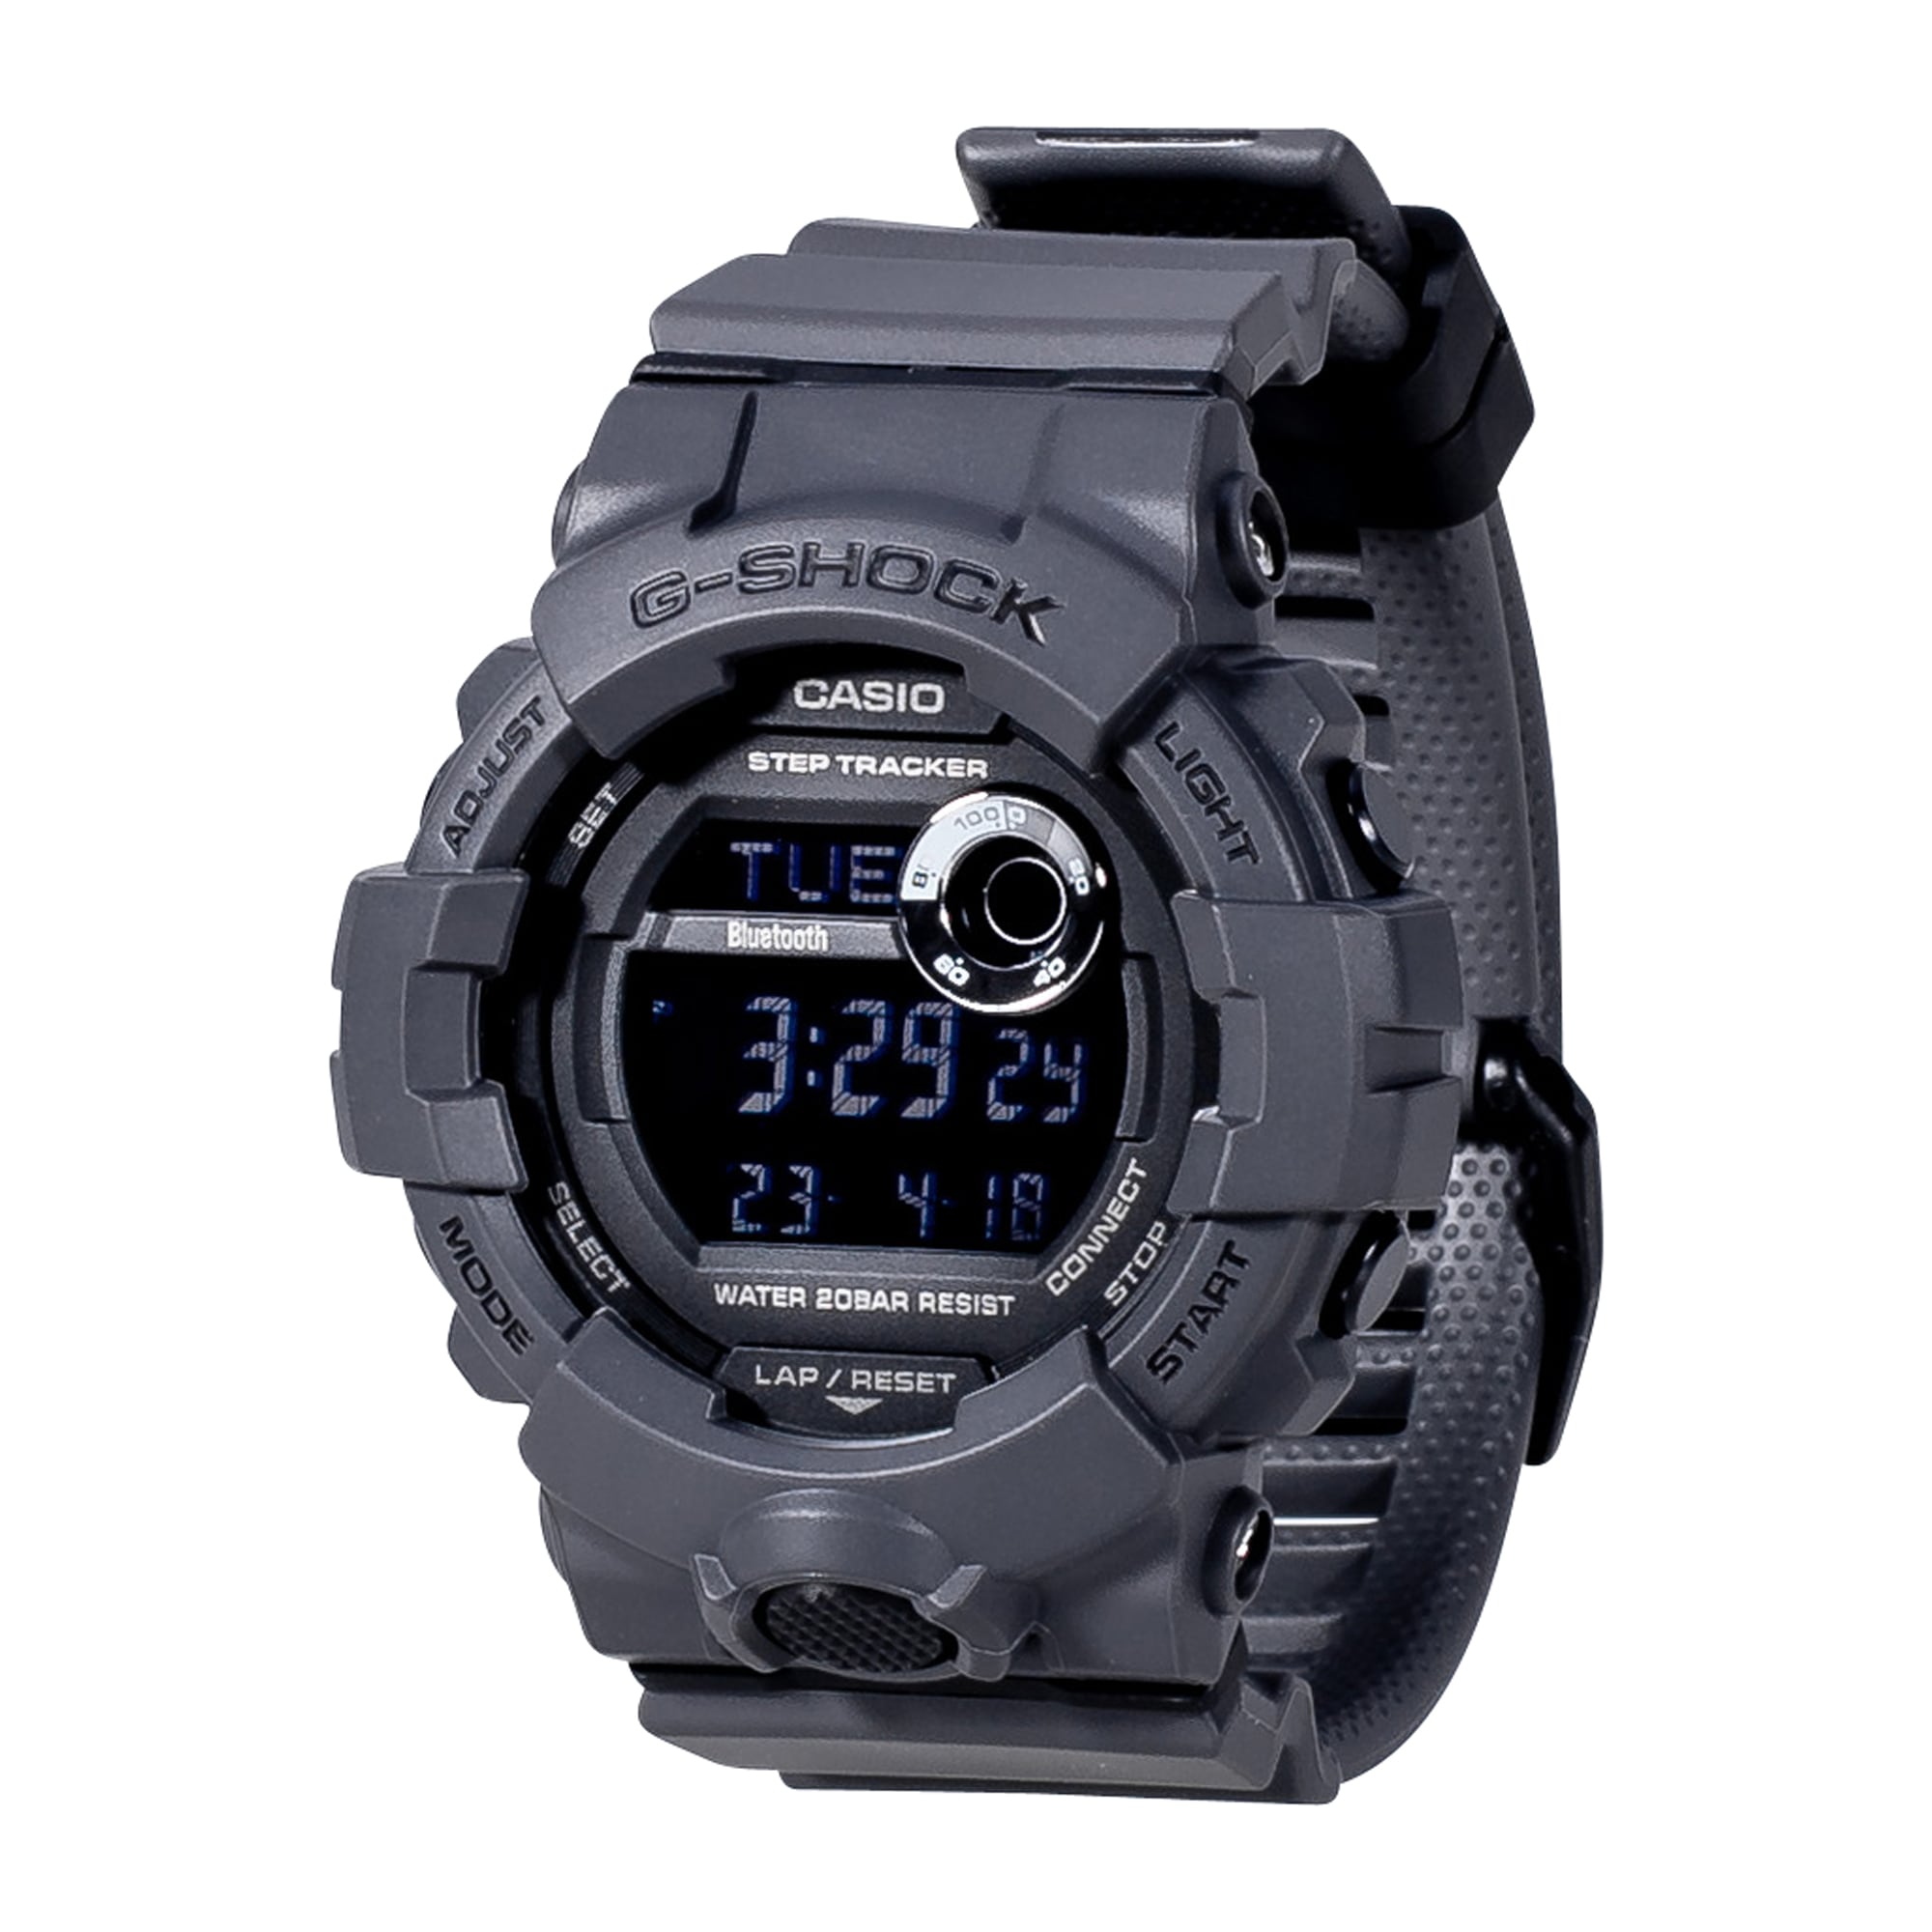 Purchase the Casio G-Shock by Watch black GBD-800UC-8ER G-Squad